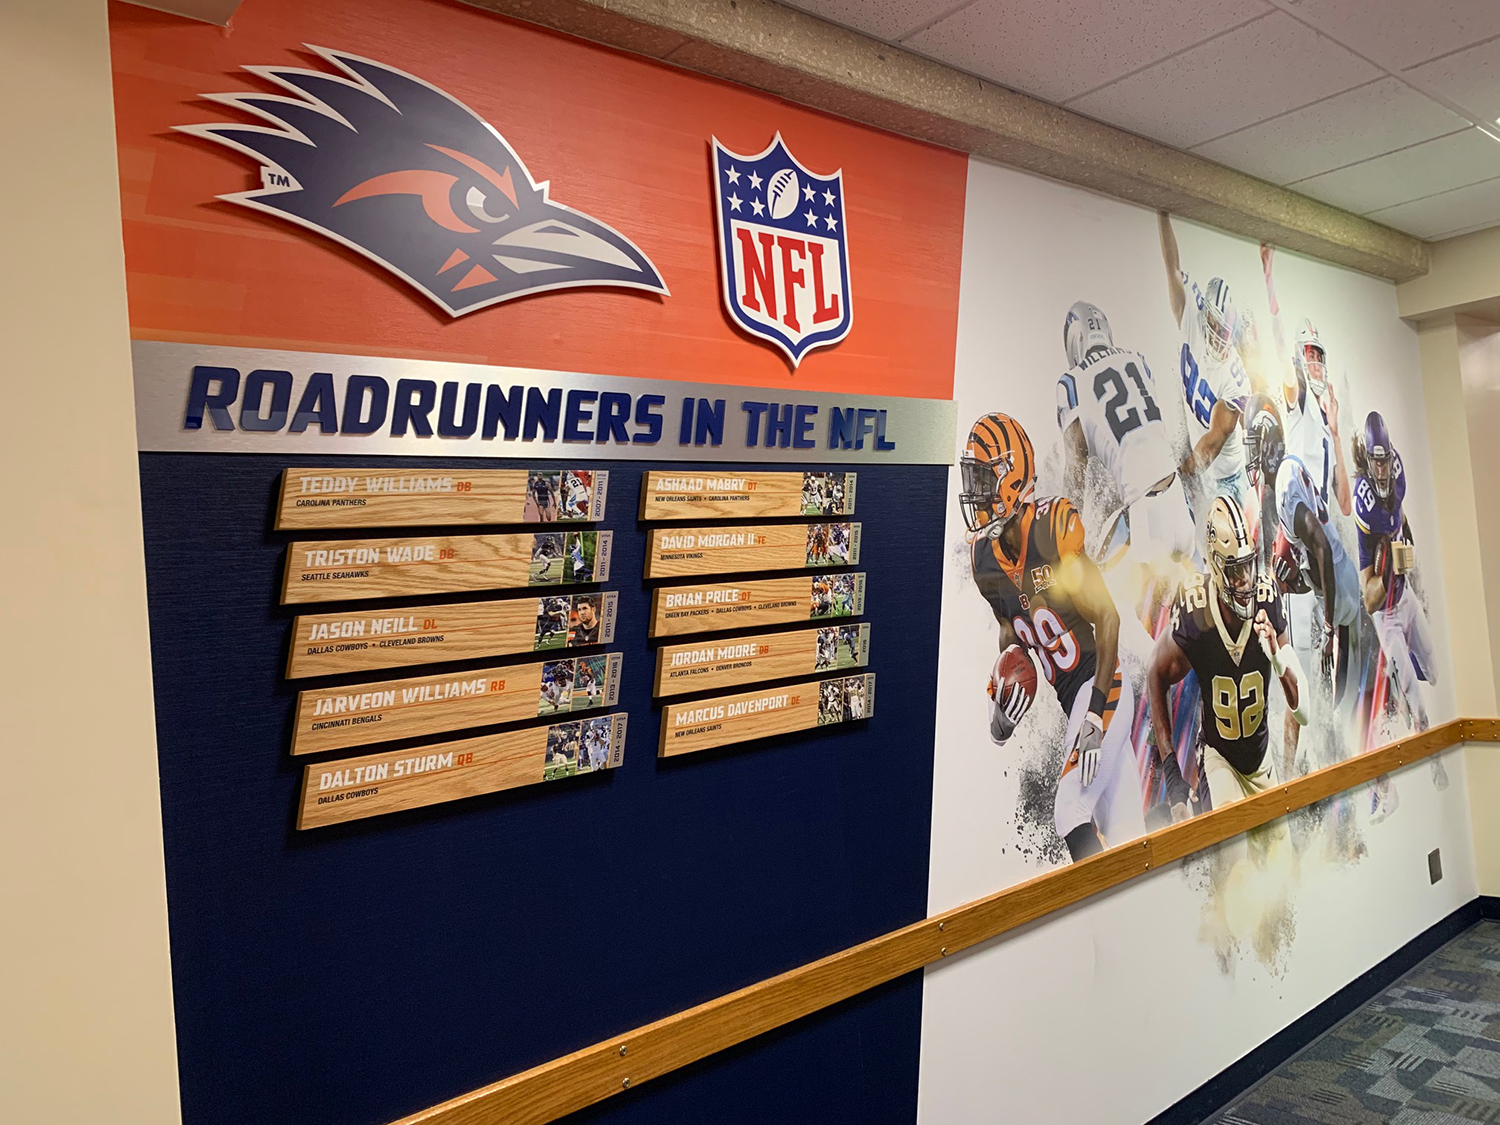 exhibit displays utsa football players who made it to the NFL